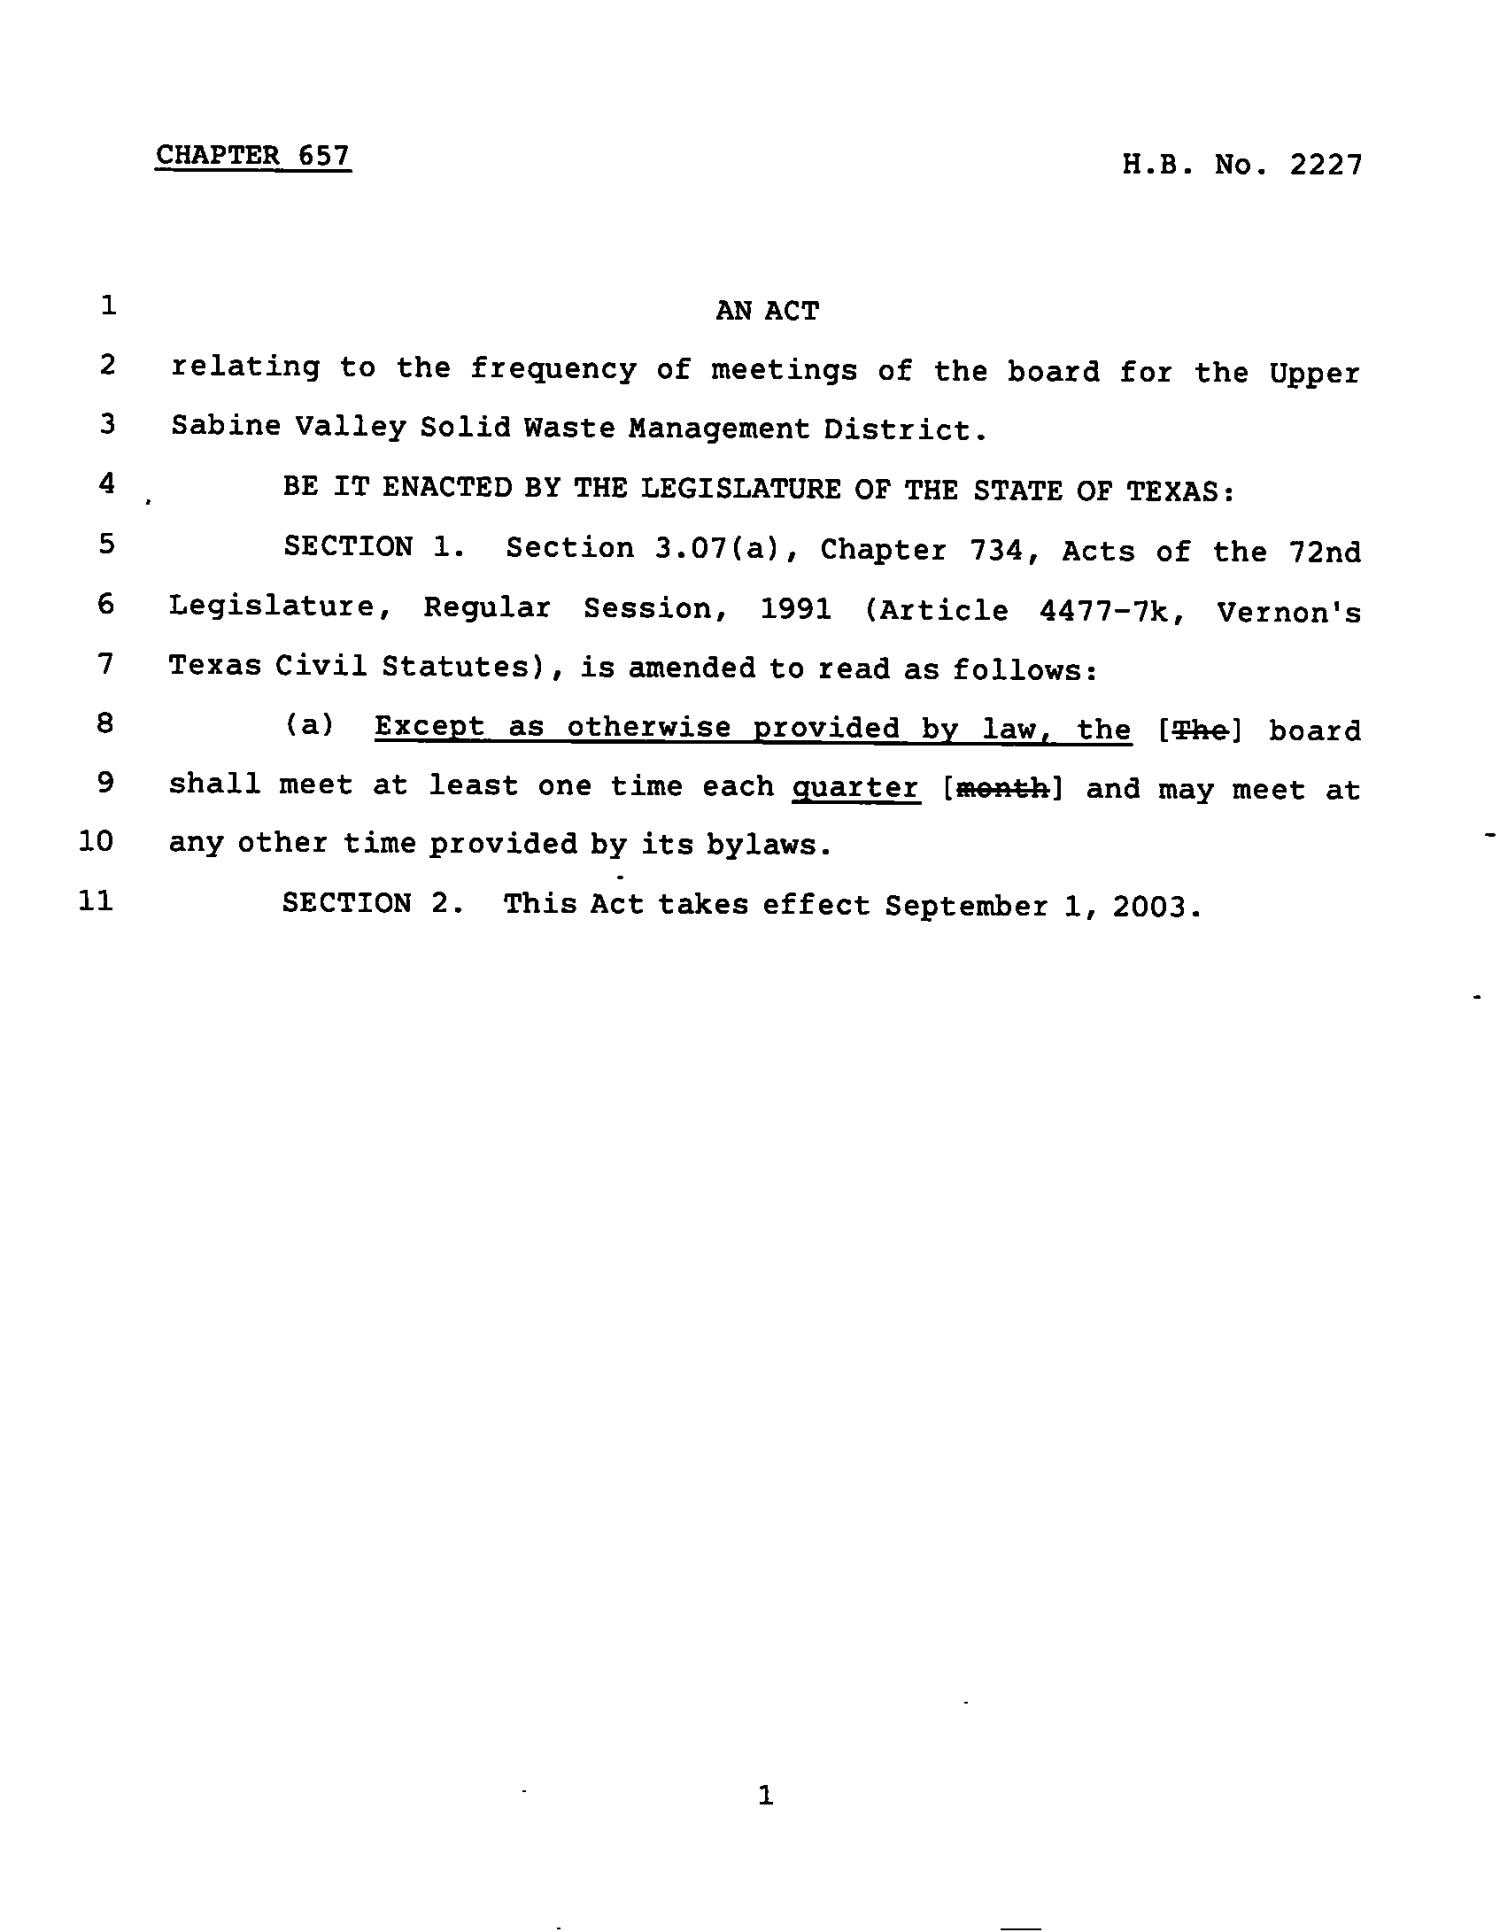 78th Texas Legislature, Regular Session, House Bill 2227, Chapter 657
                                                
                                                    [Sequence #]: 1 of 2
                                                